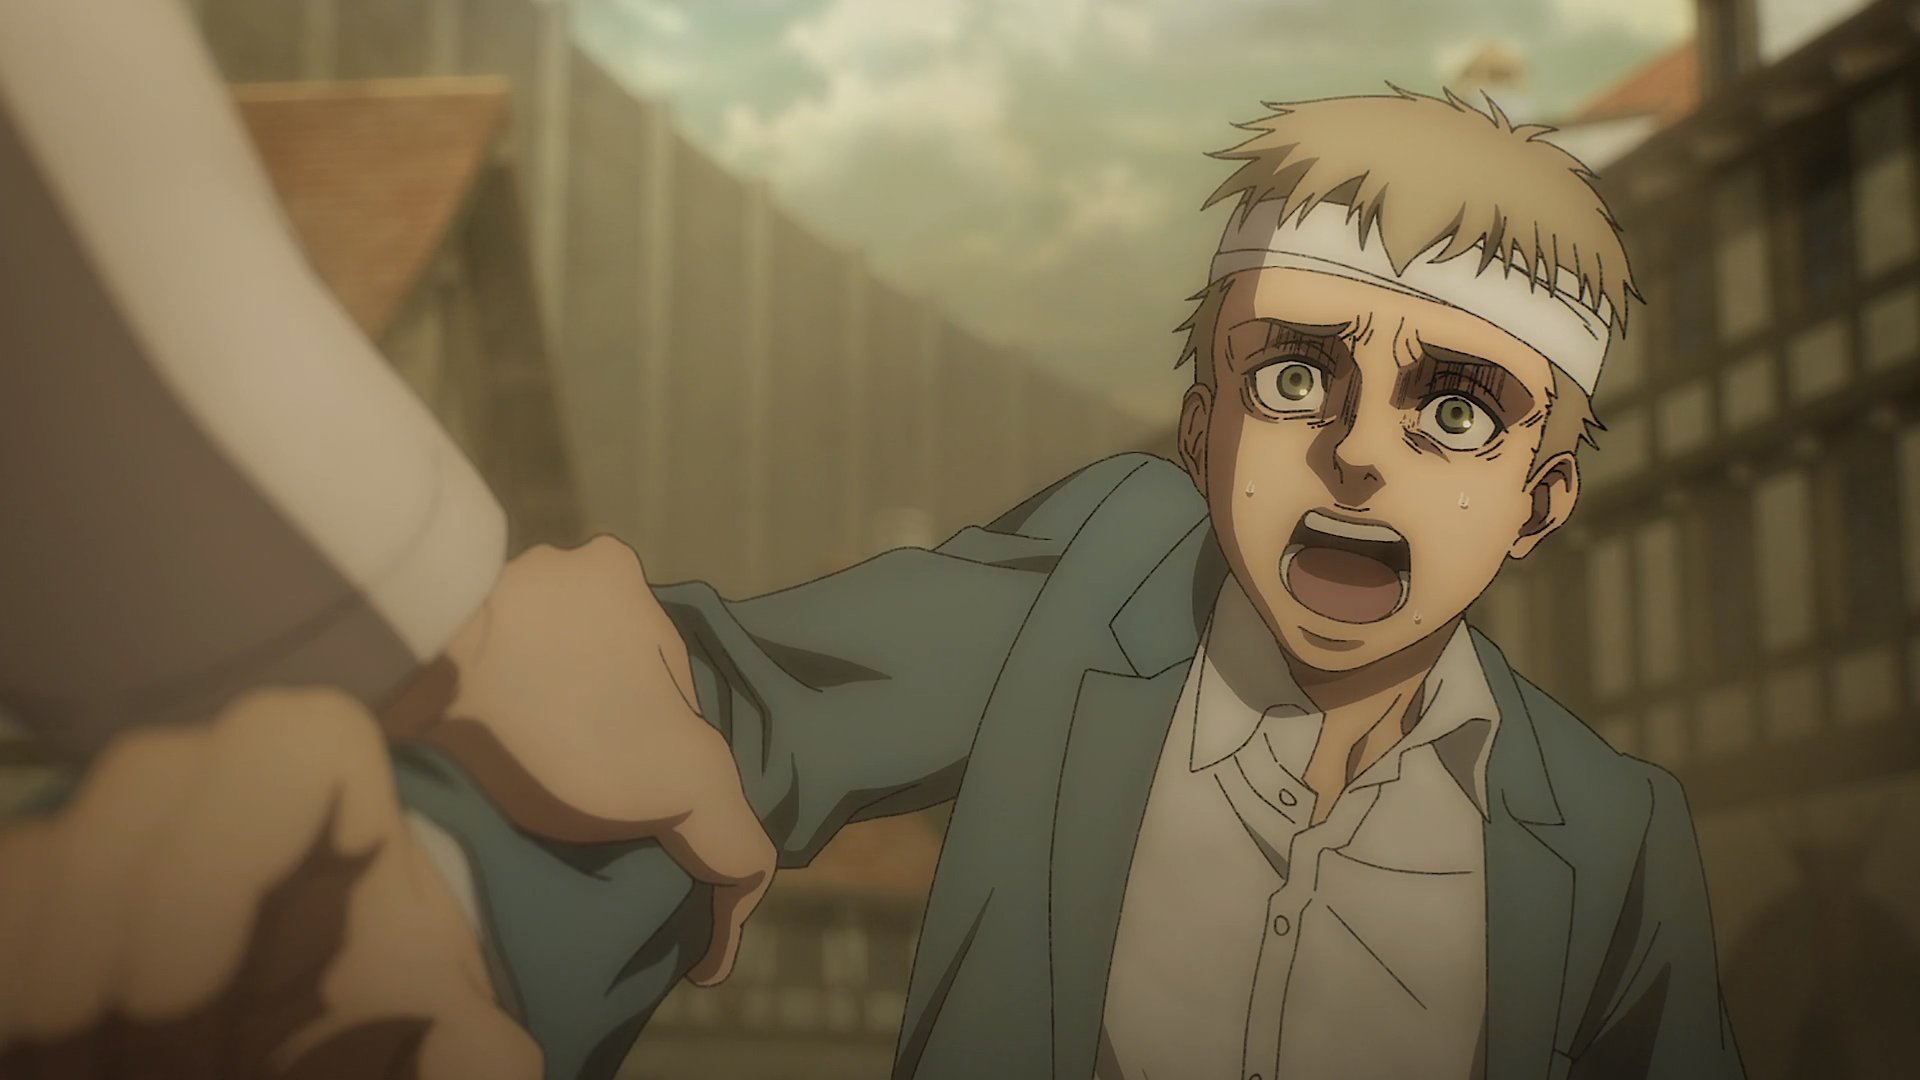 Attack On Titan Episode 78 Release Date, Spoilers And Where To Watch?